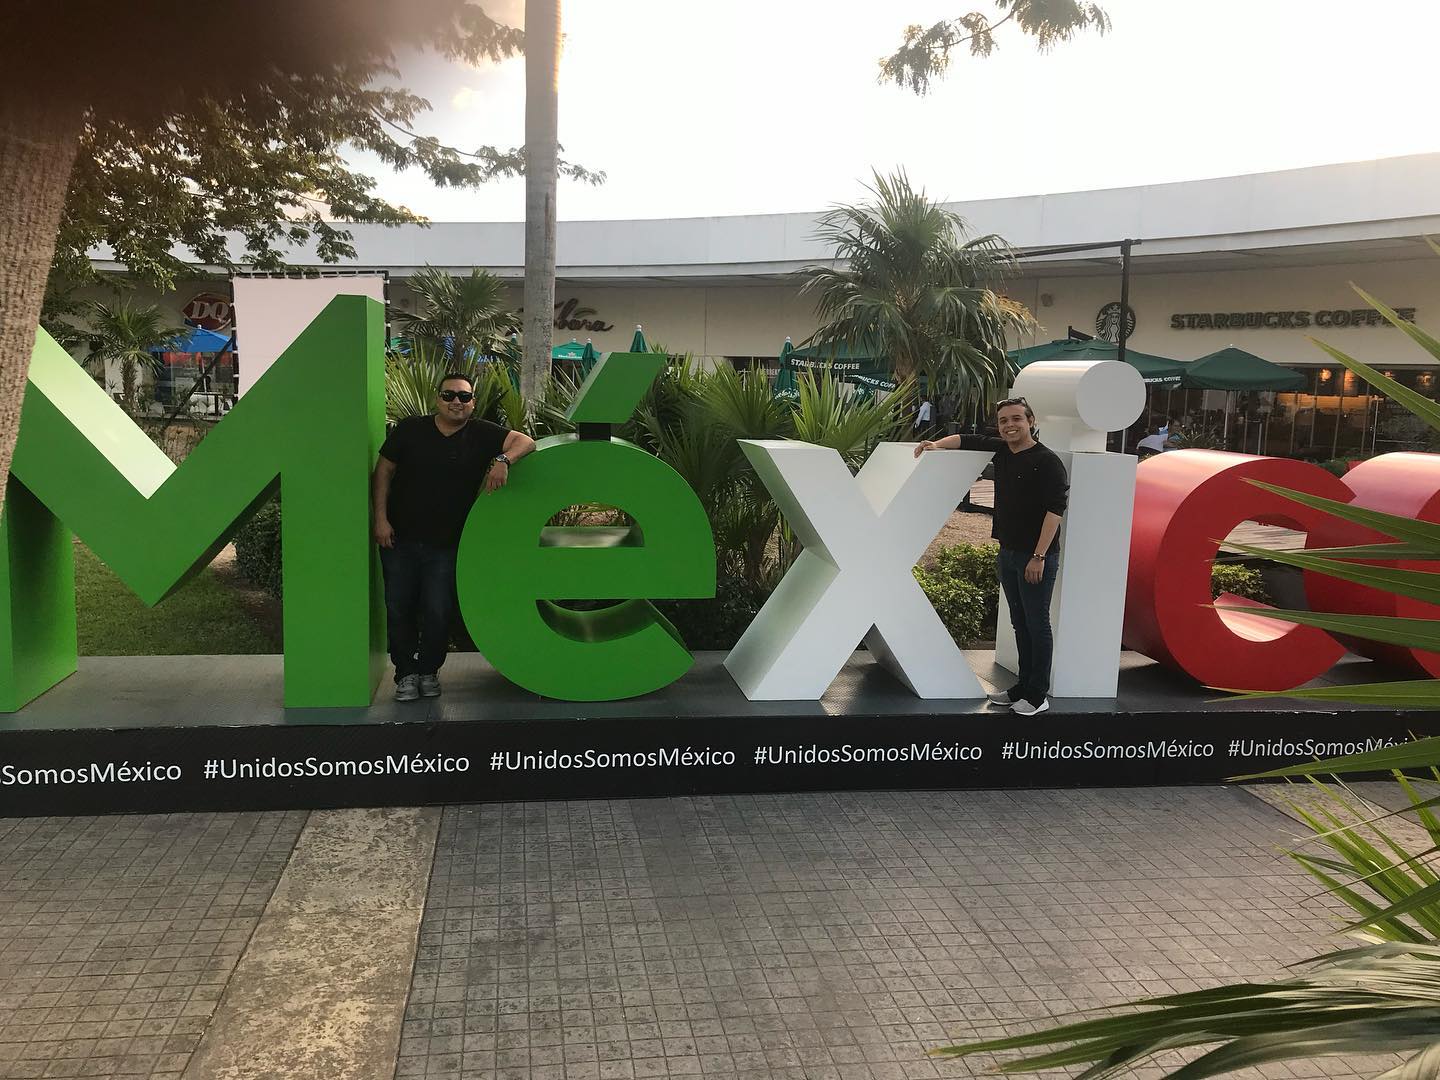 Feliz Día de la Independencia Mexicooooo! I’m proud to be half Mexican, my mom hails from Mérida, Yucatán, Mexico! I’ll forever be proud to not only be Mexican but to know Cinco de Mayo isn’t independents day  VIVA MEXICO 🇲🇽⁣ @andresgamboac @marcogamboac 
@nanonovelo 
Cabrones 🤣
.⁣
.⁣
.⁣
.⁣
#mexico🇲🇽 #méxico